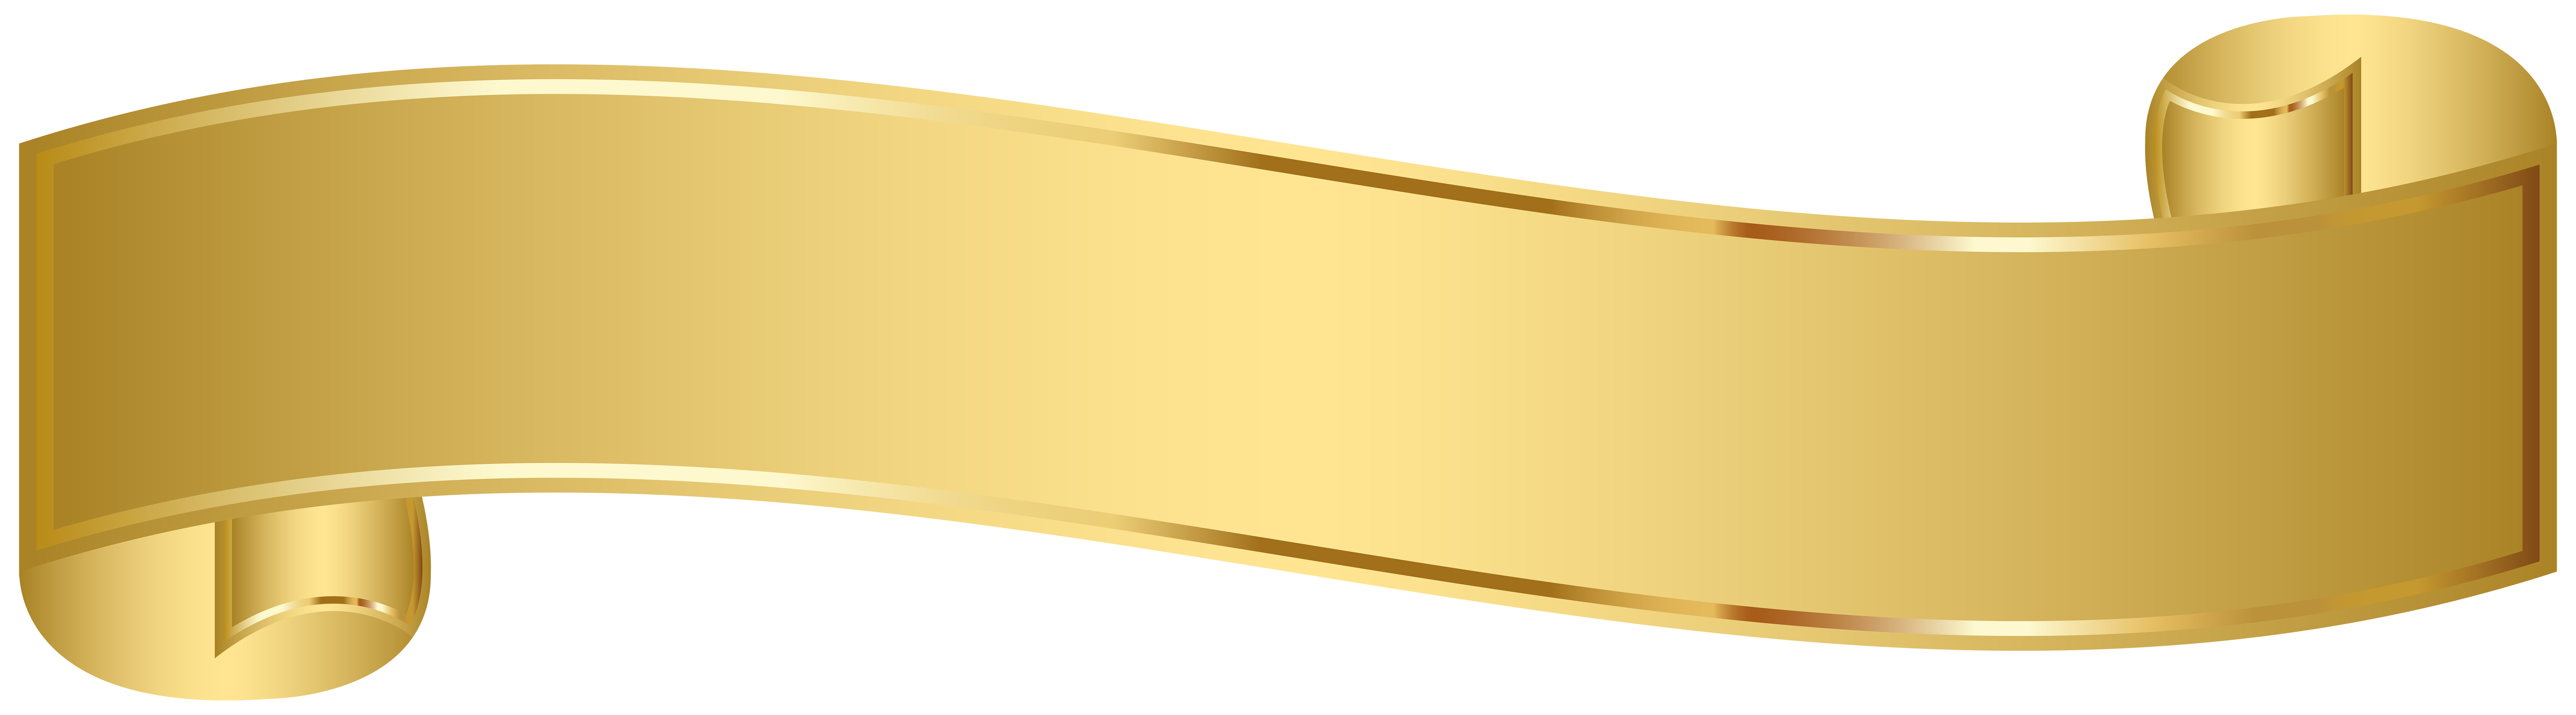 gold blank banners